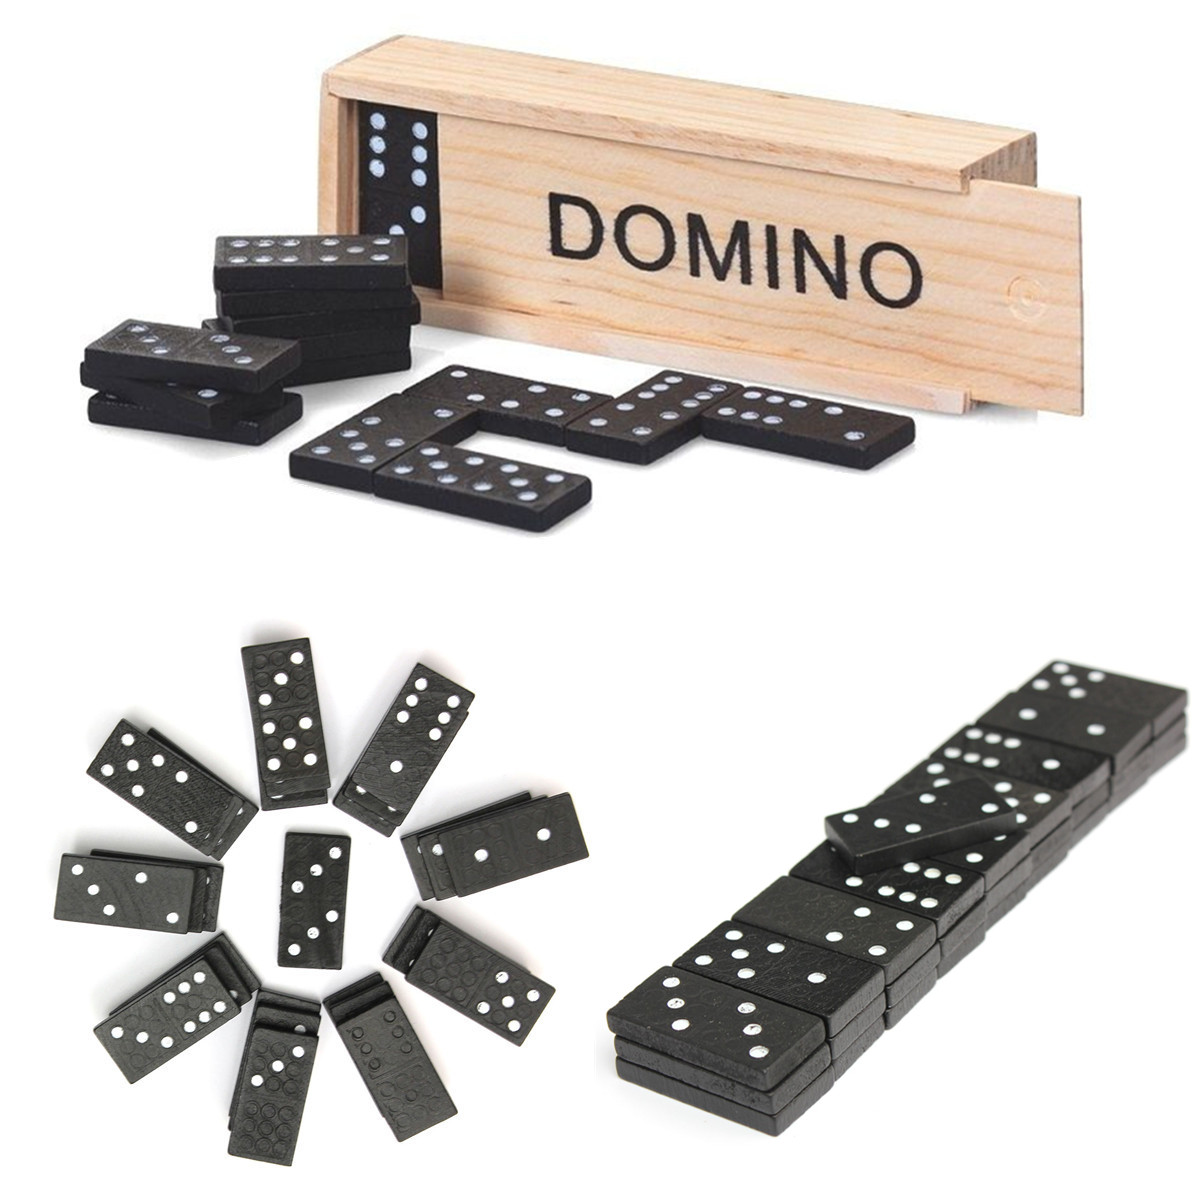 

28pcs Children's Wooden Boxed Domino Game Play Set Traditional Classic Toy Gifts